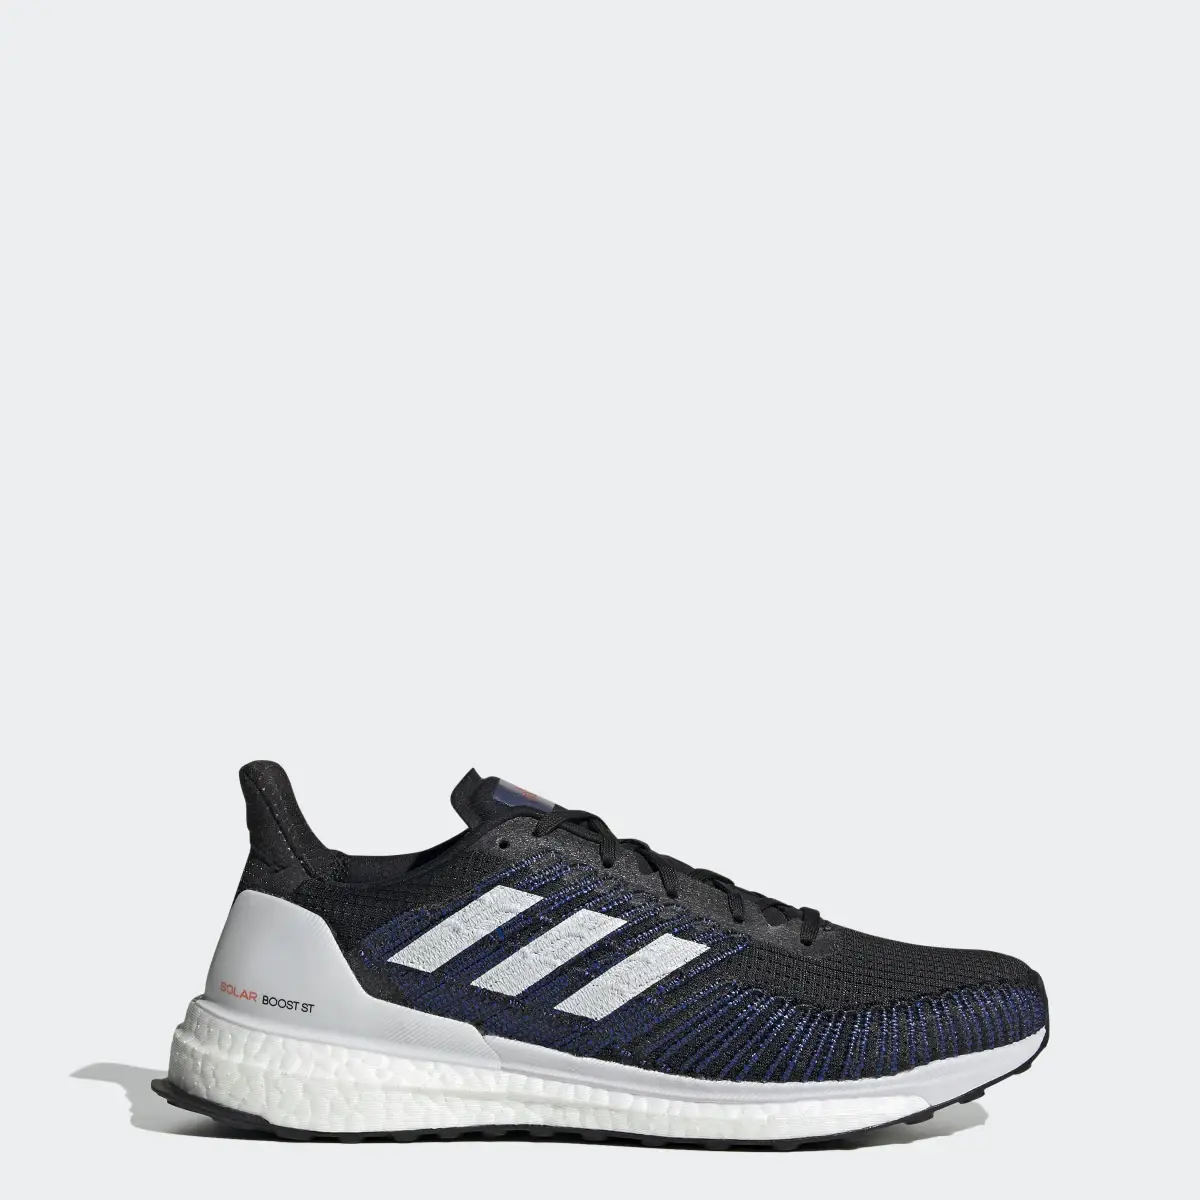 Adidas Solarboost ST 19 Shoes. 1